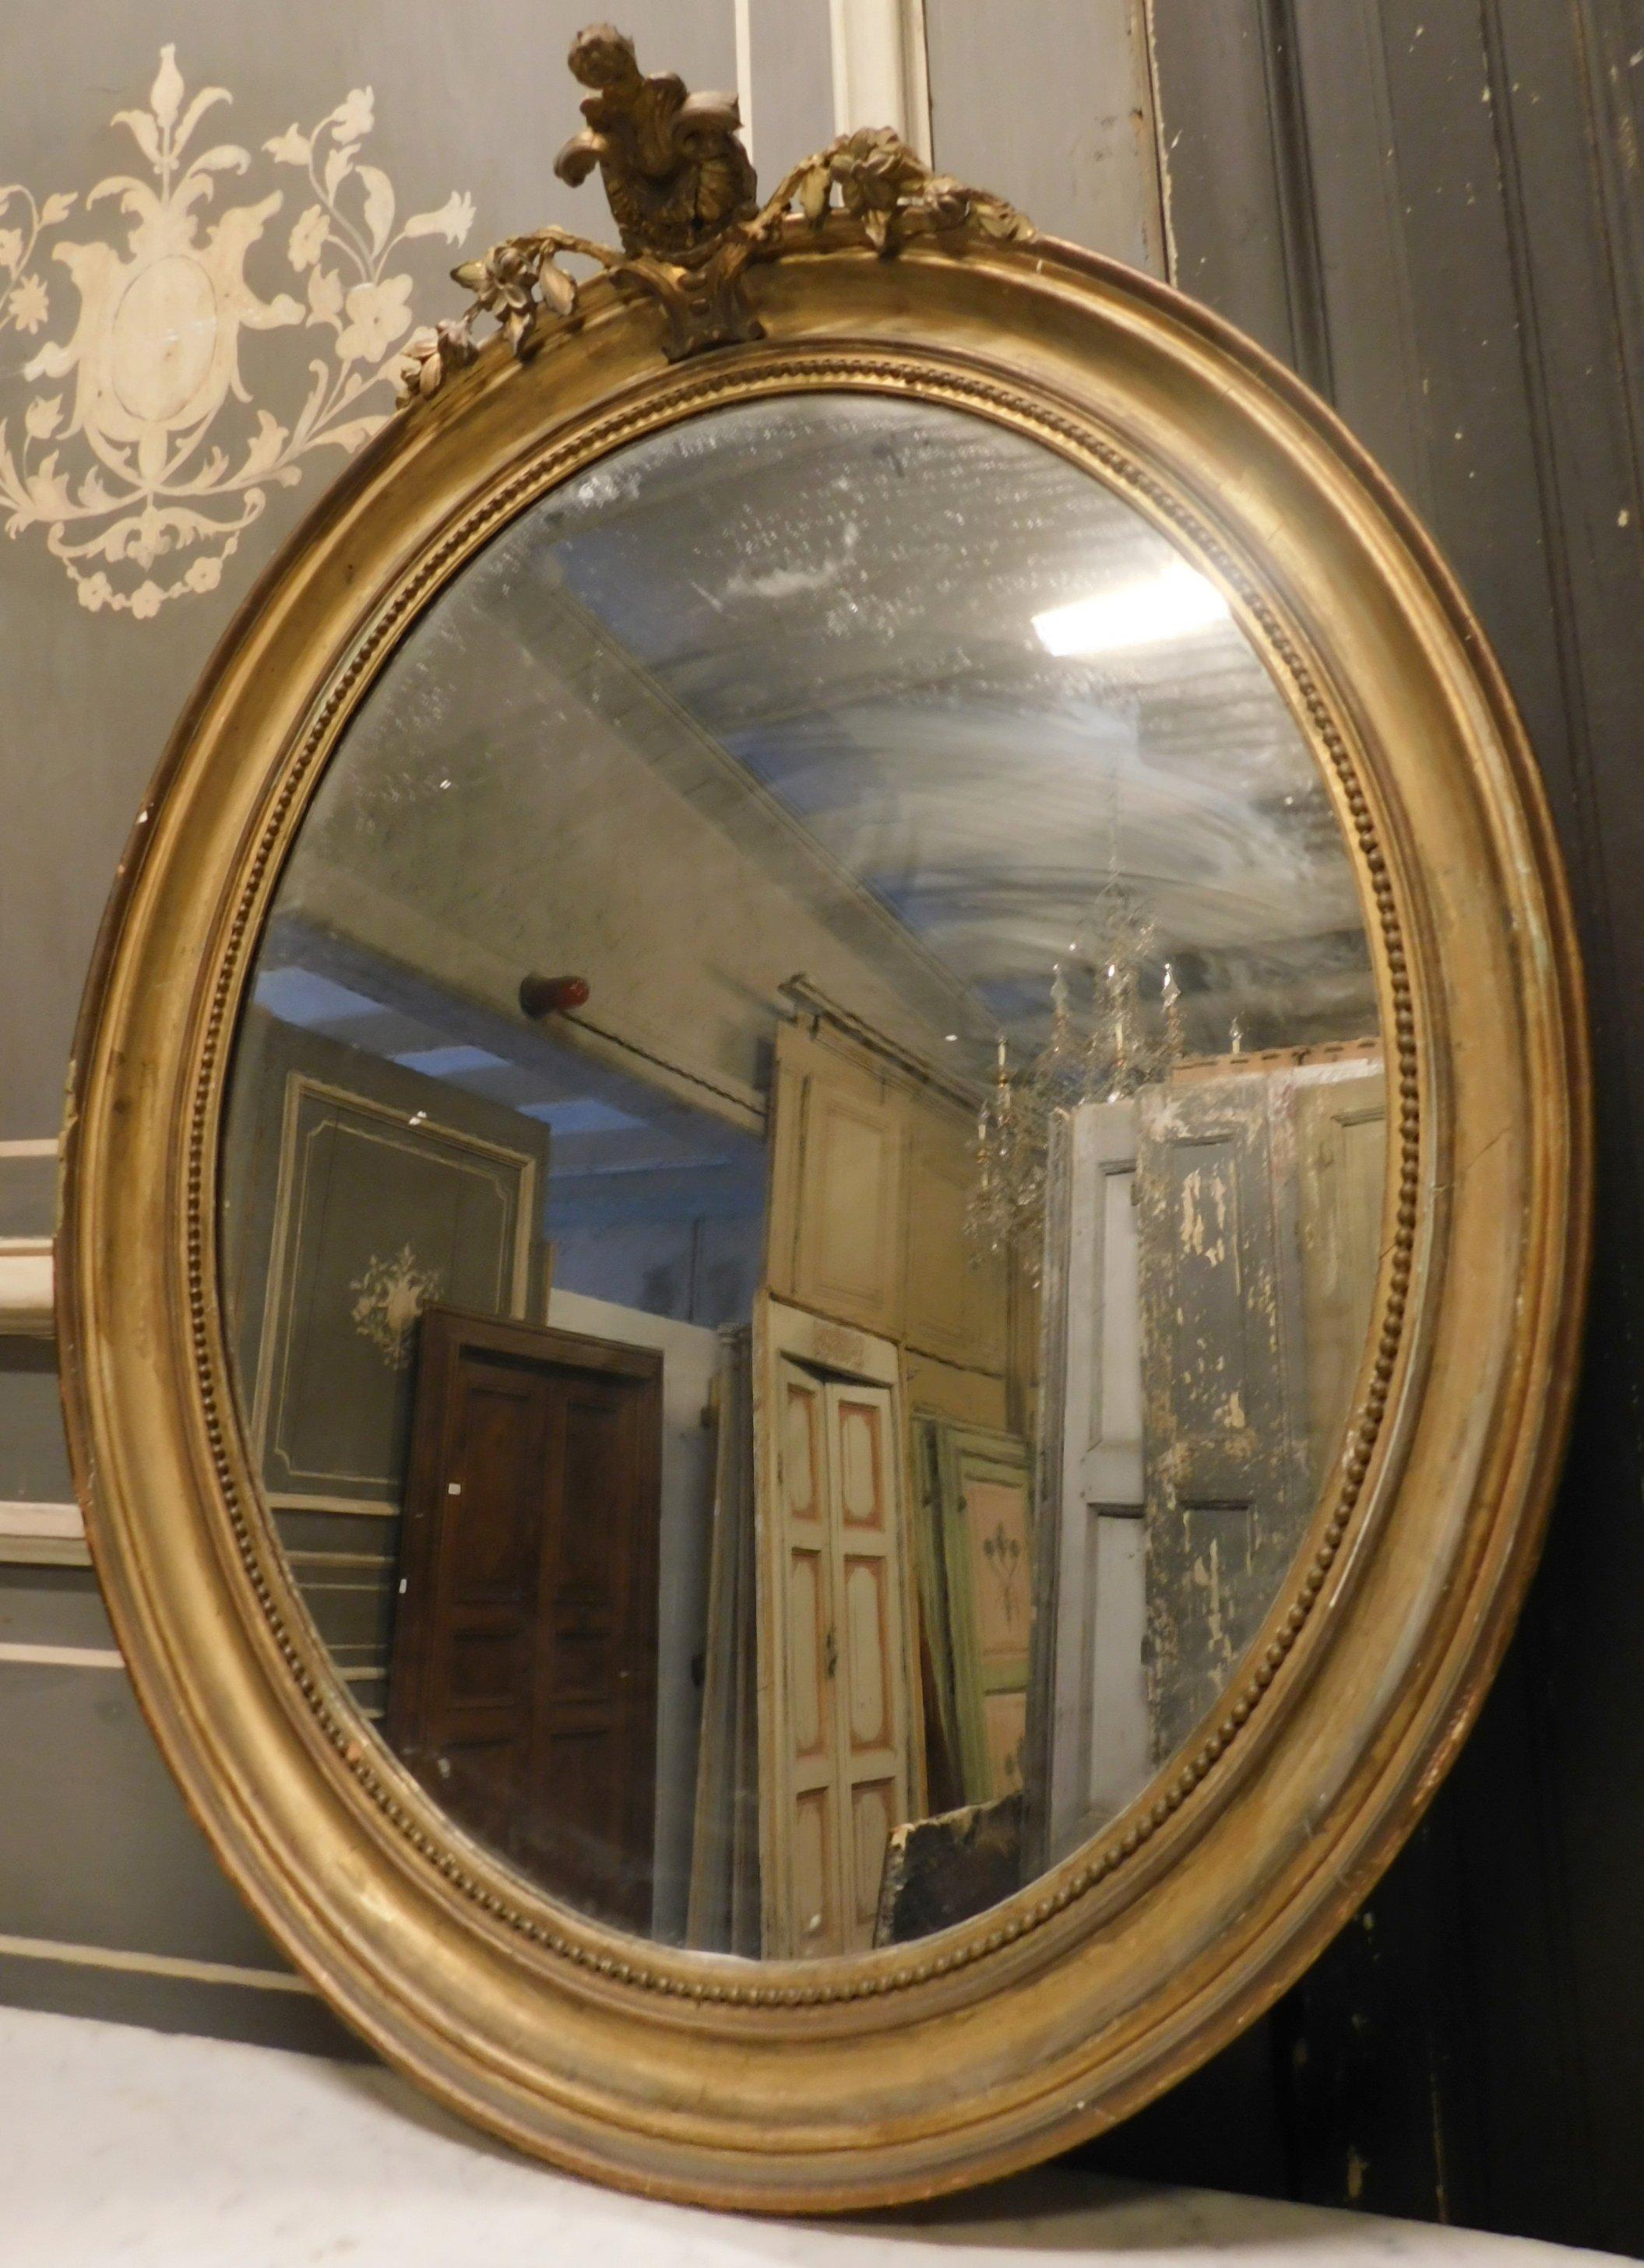 Antique wooden mirror with gold frame, to hang on the wall or to be installed on sideboards or consoles, also suitable for luxury bathrooms, it has a simple shape that can be combined with the modern one. Classic taste in good condition and with